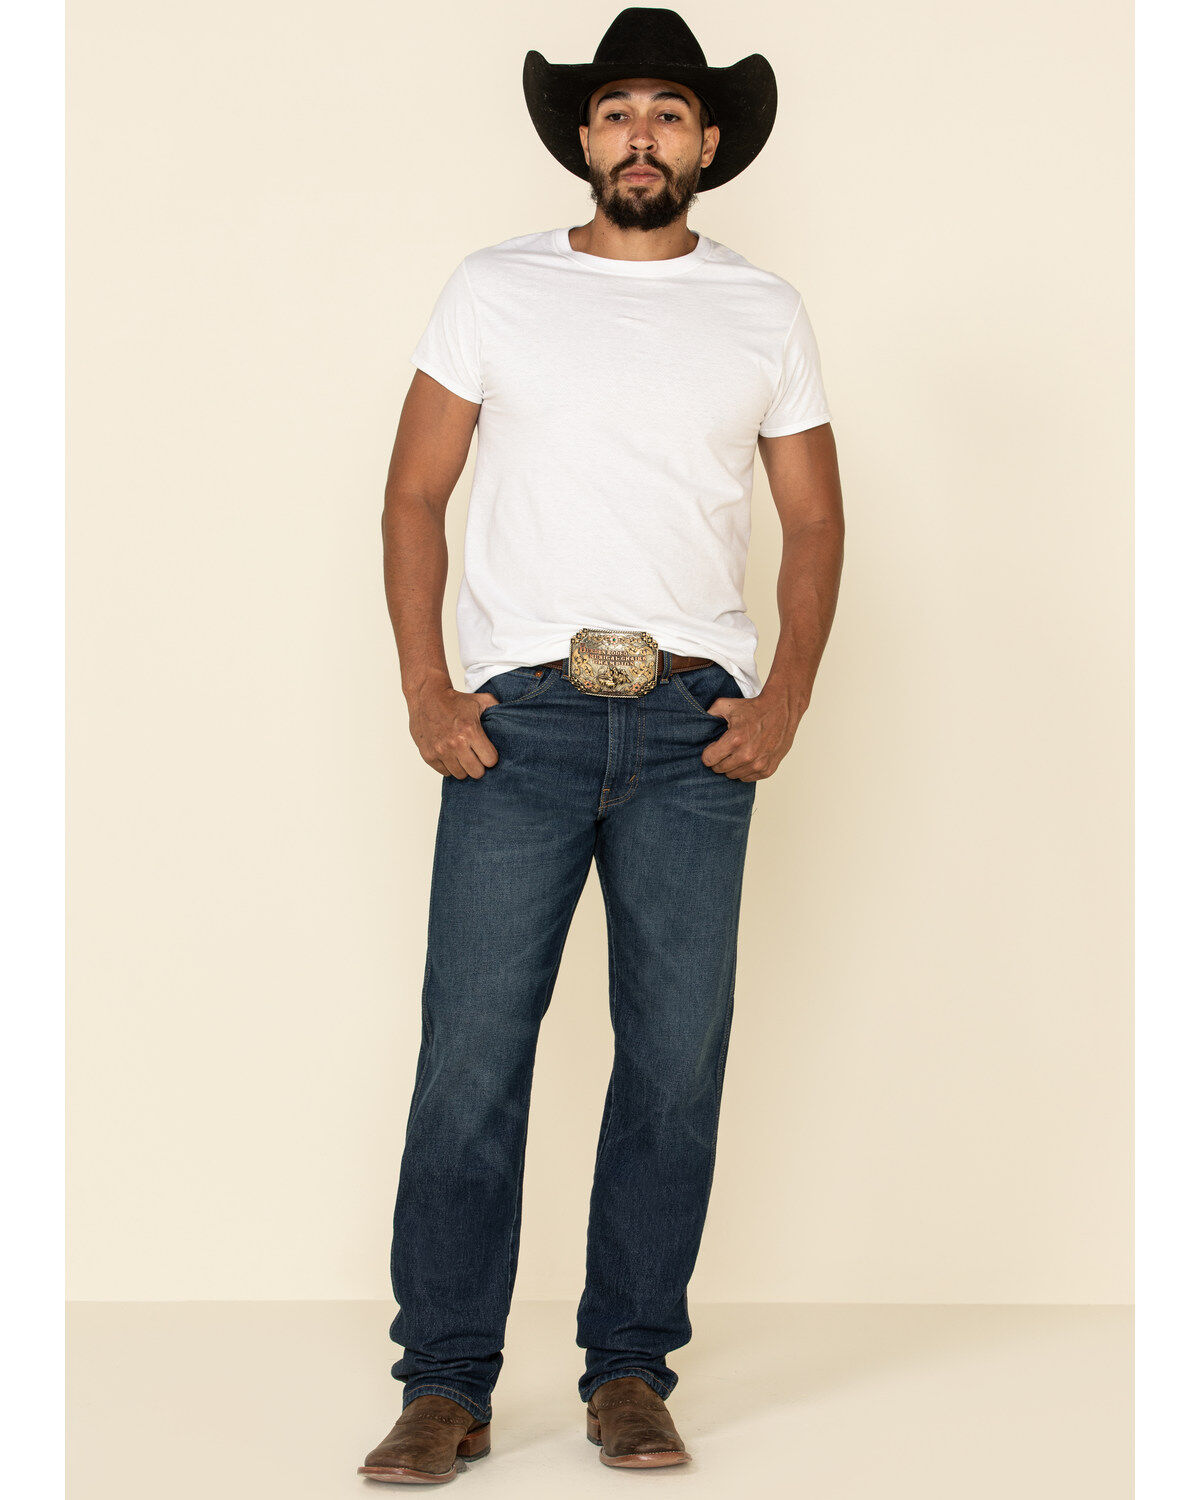 levis 514 with cowboy boots